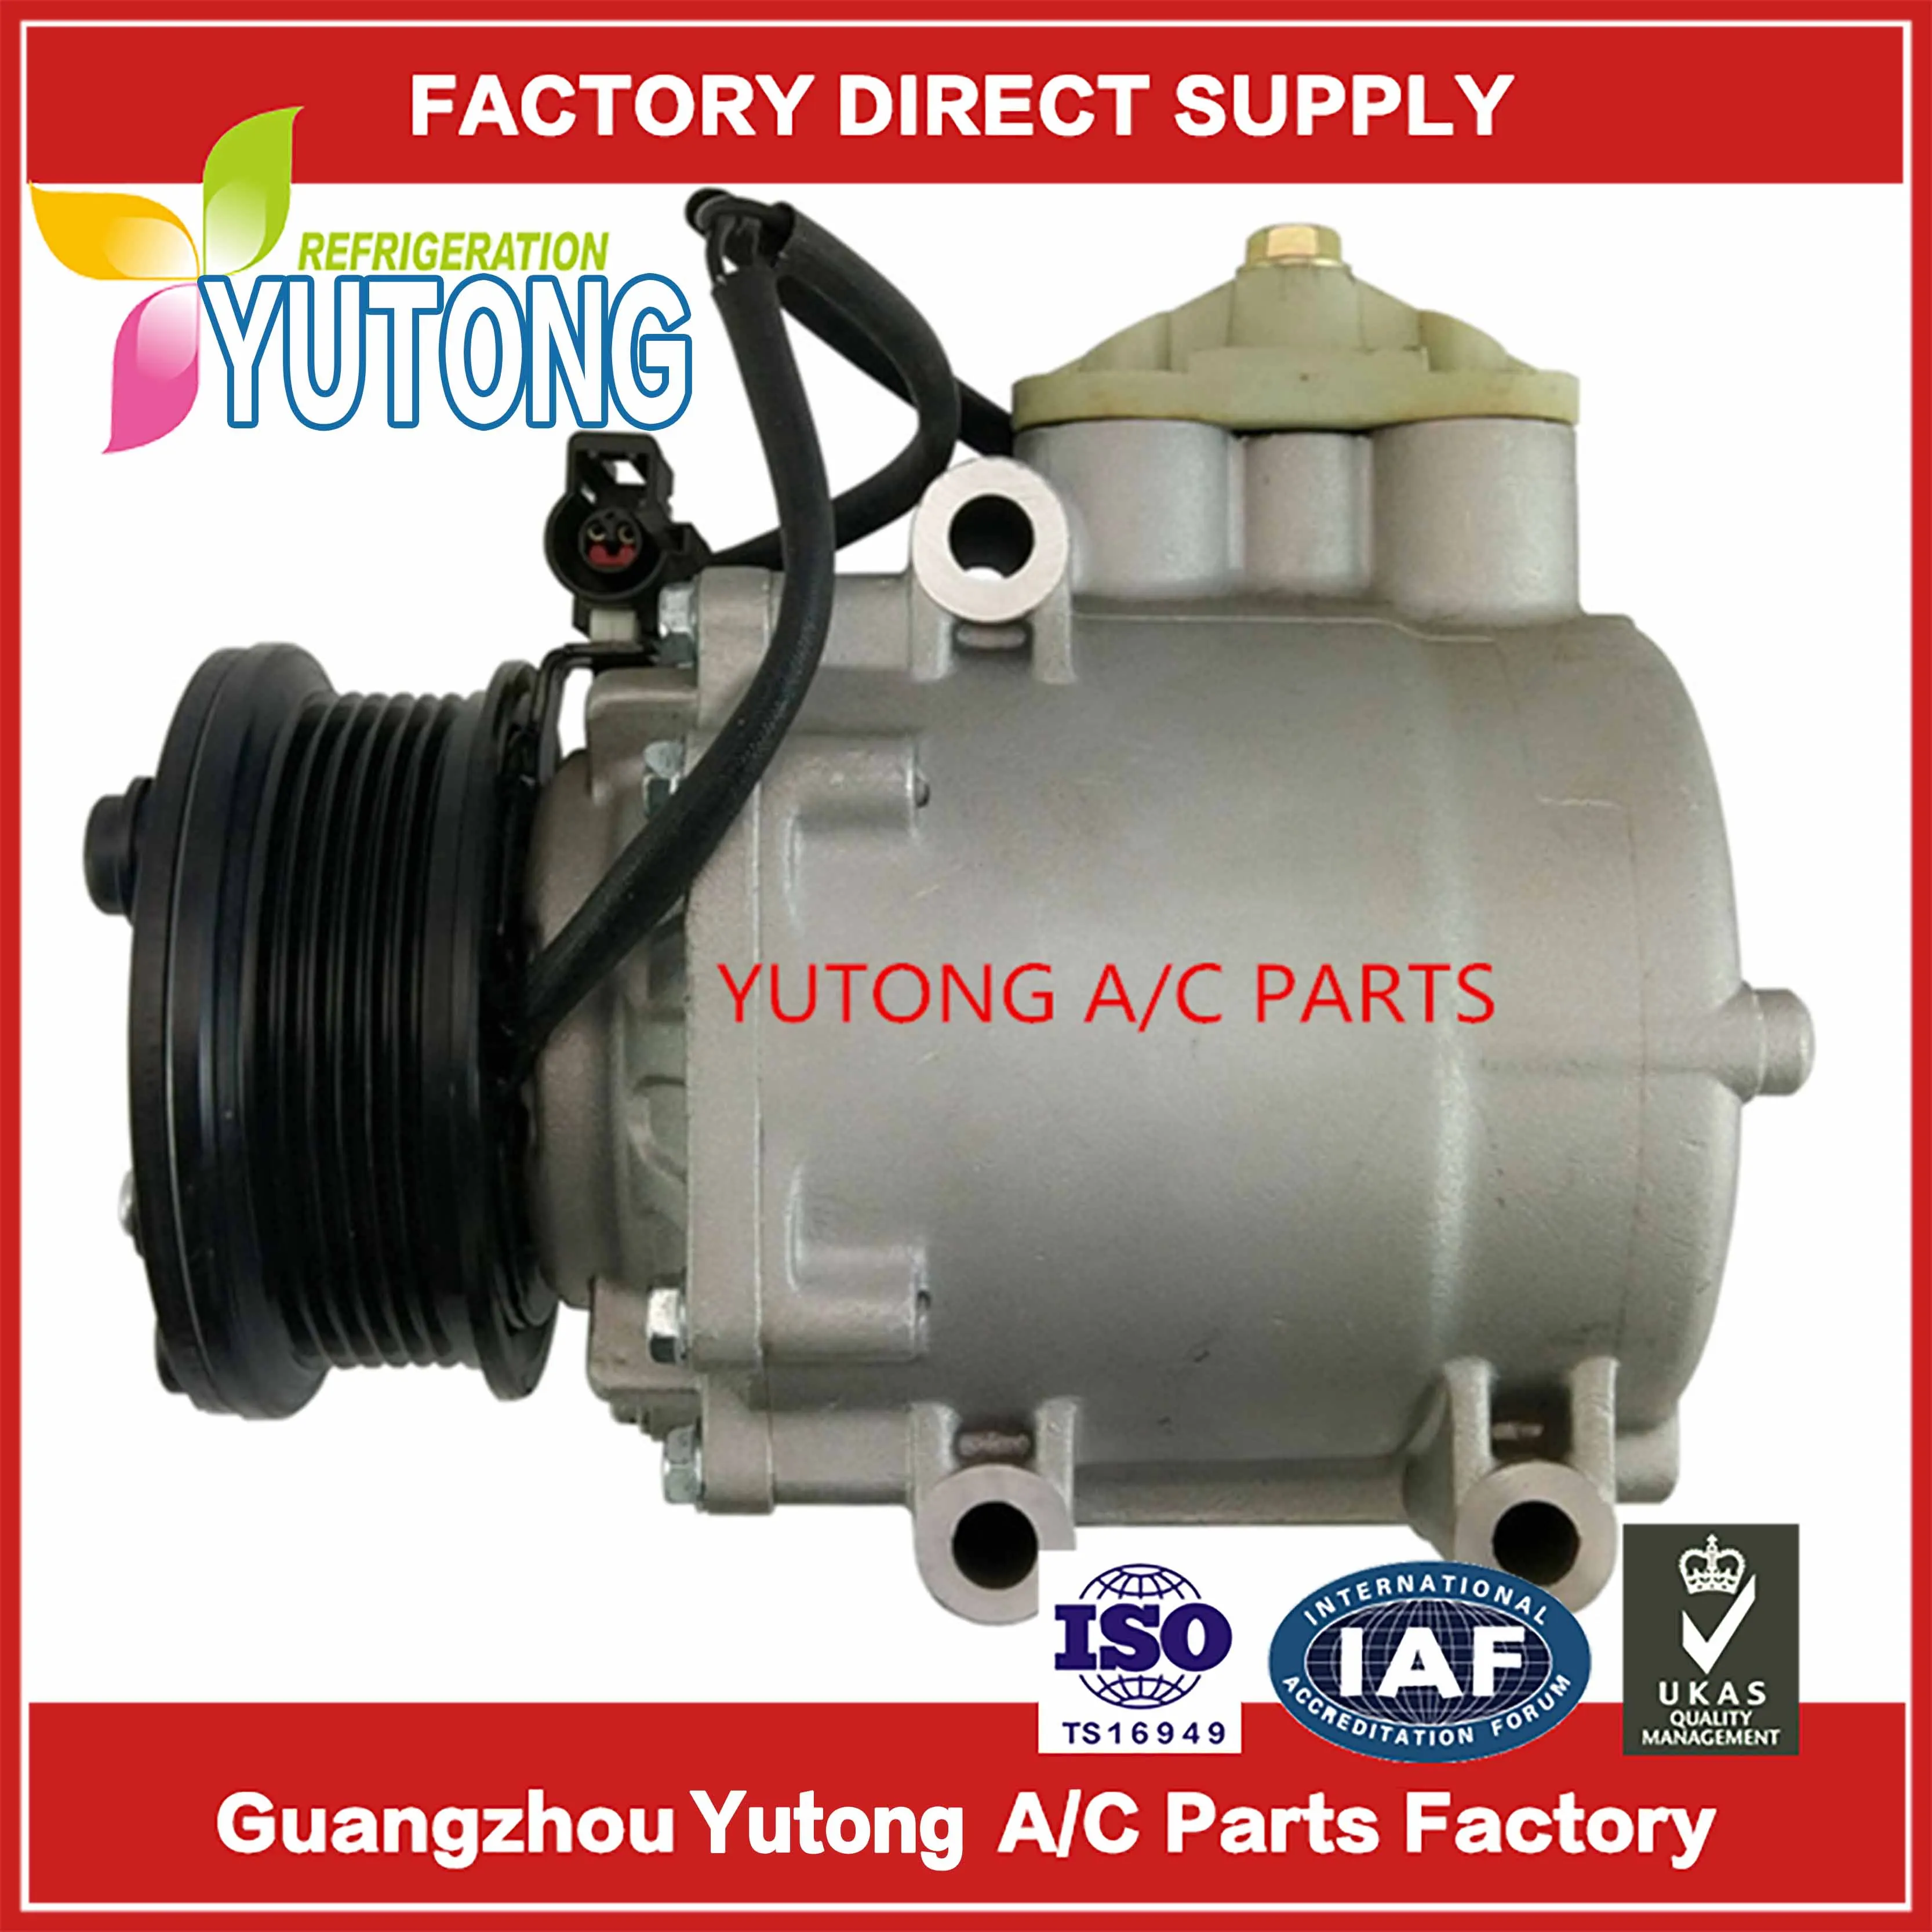 

AC Compressor For Ford RXS7H19D629BA RXS7H19D629BB RXS7H19D629BC RXS7H19D629BE RXS7H19D629BF XS7H19497AA XS7H19D629BA